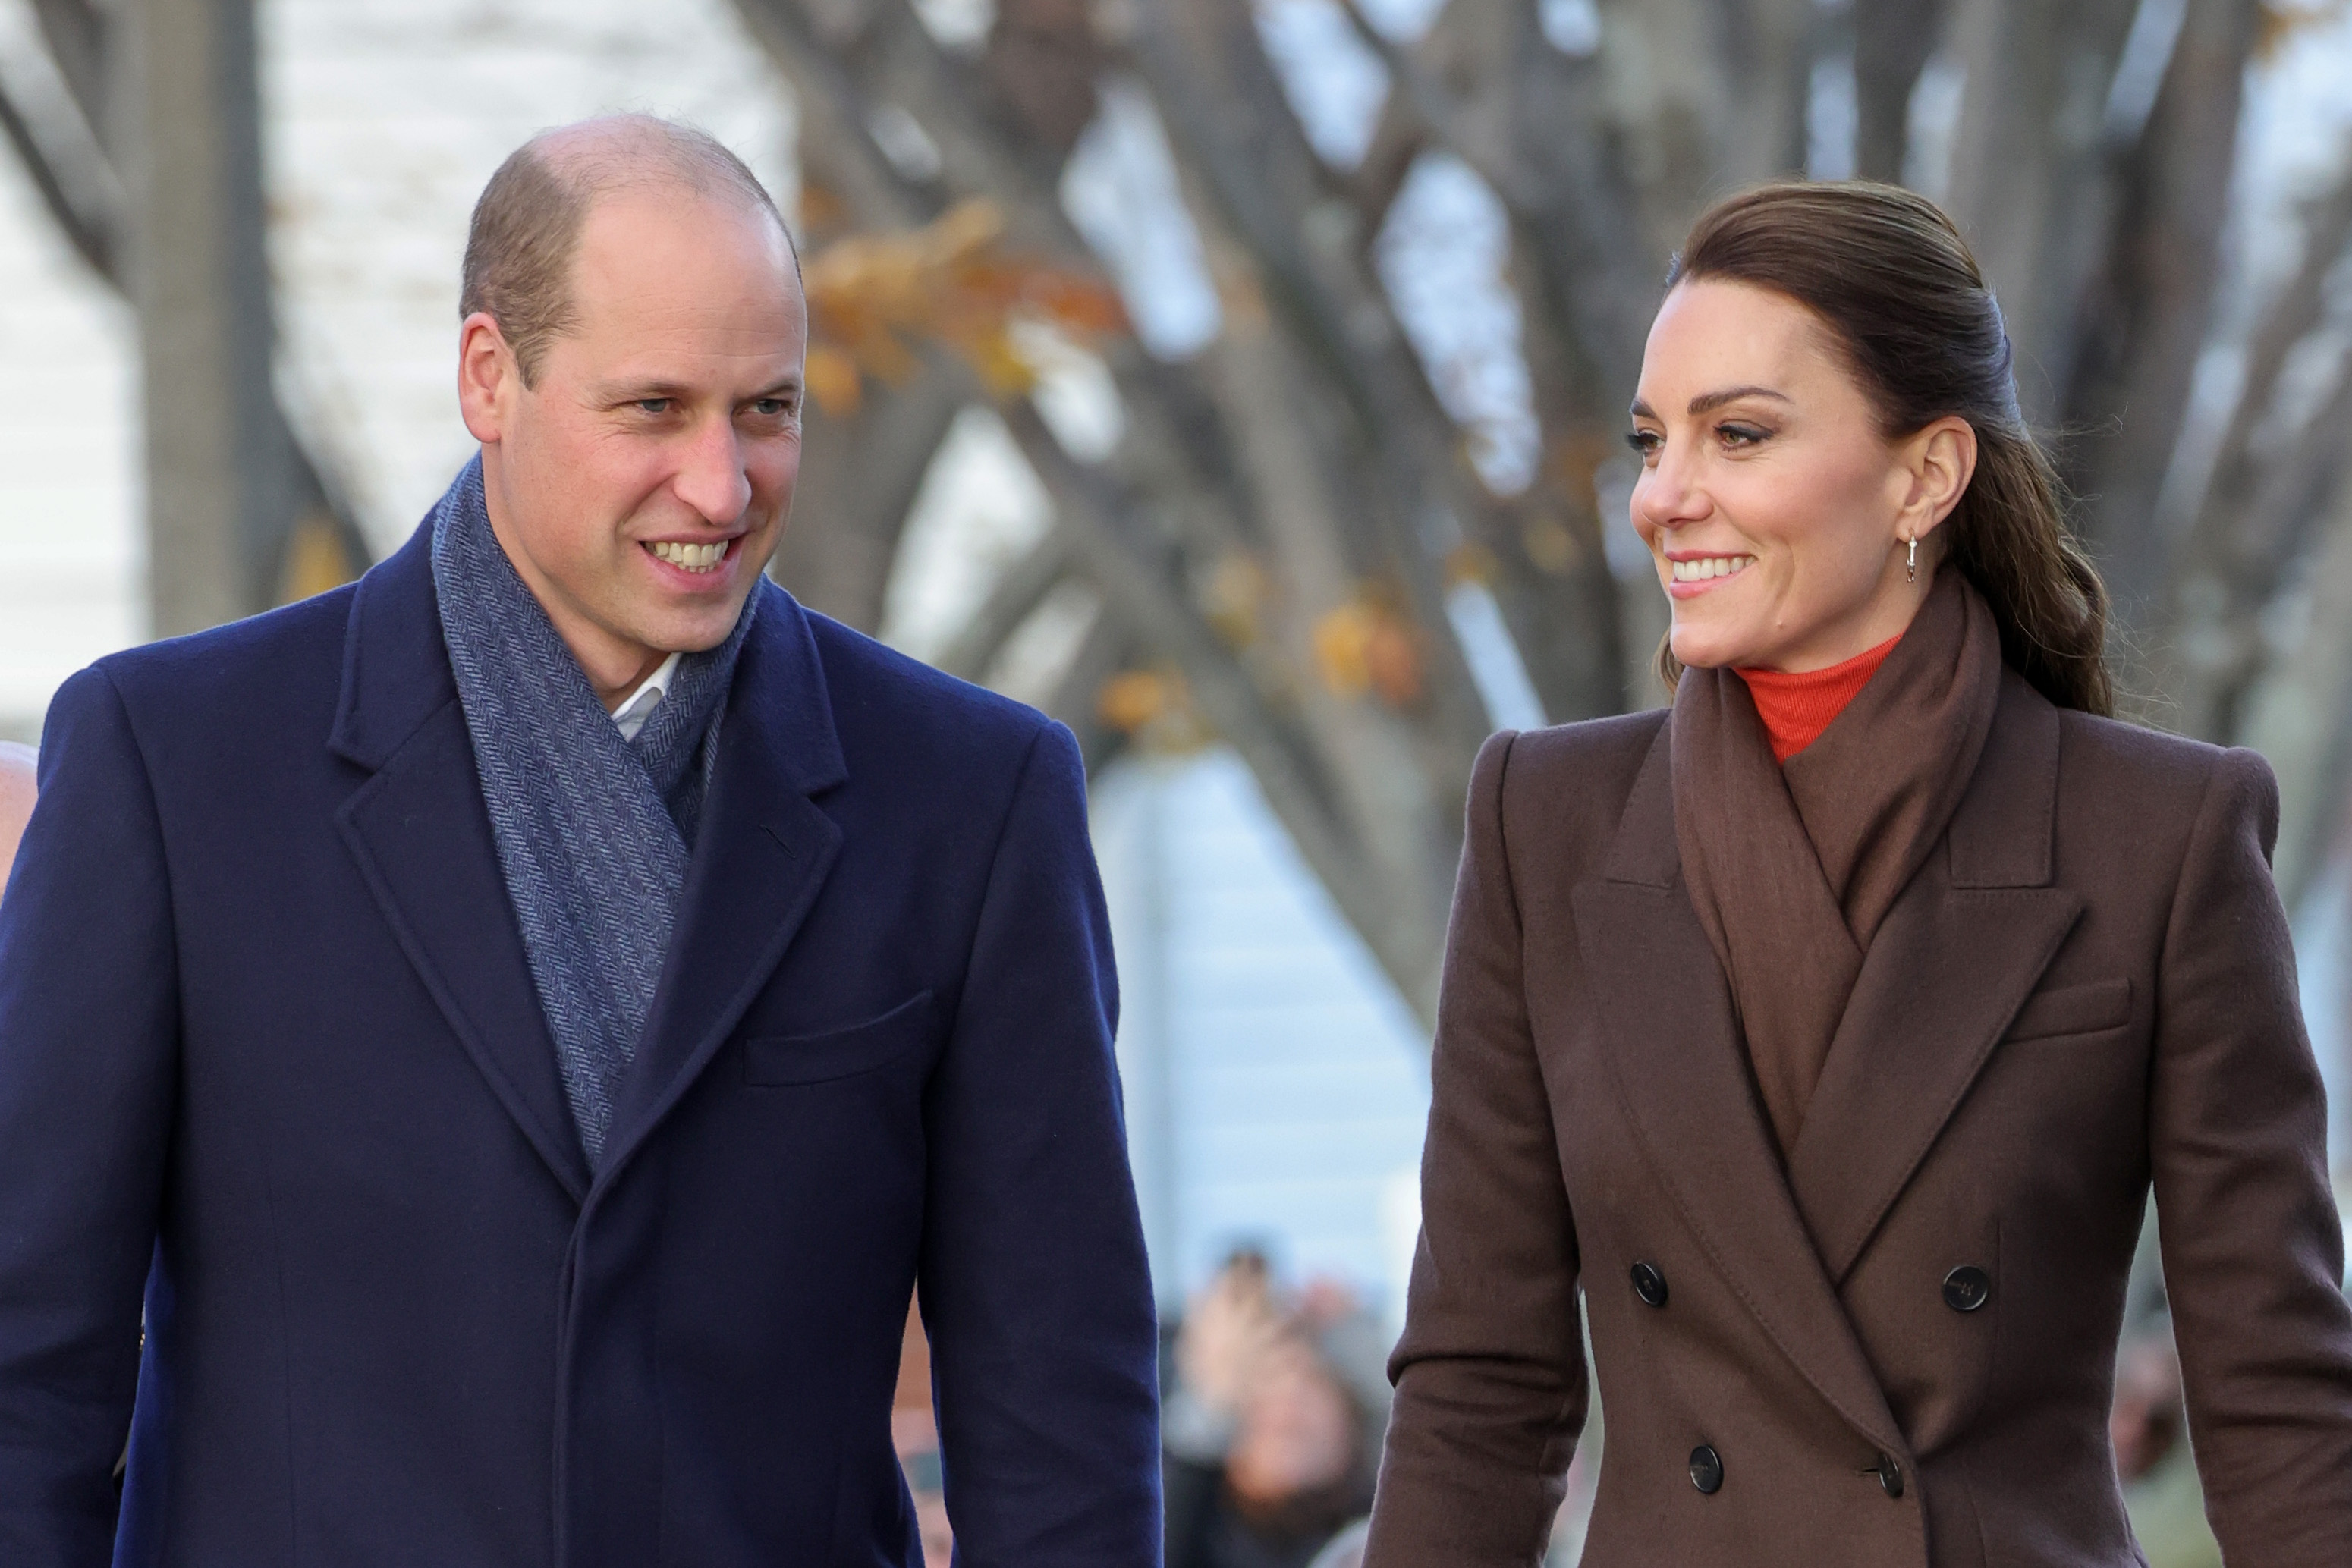 William and Kate visit East Boston to see the changing face of Boston’s shoreline as the city contends with rising sea levels